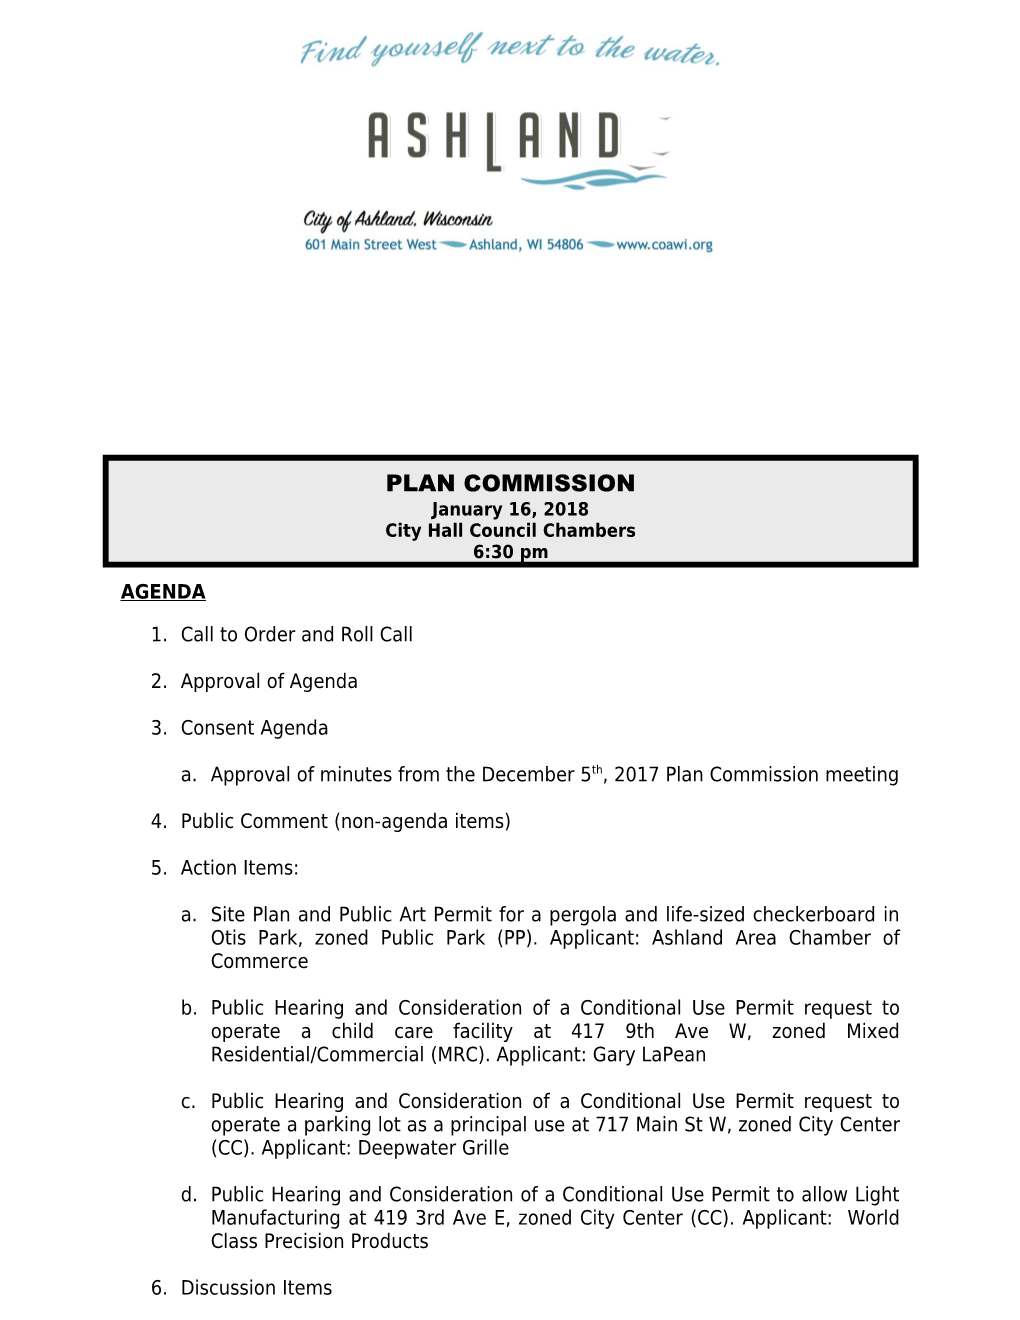 Planning Commission Meeting Notice